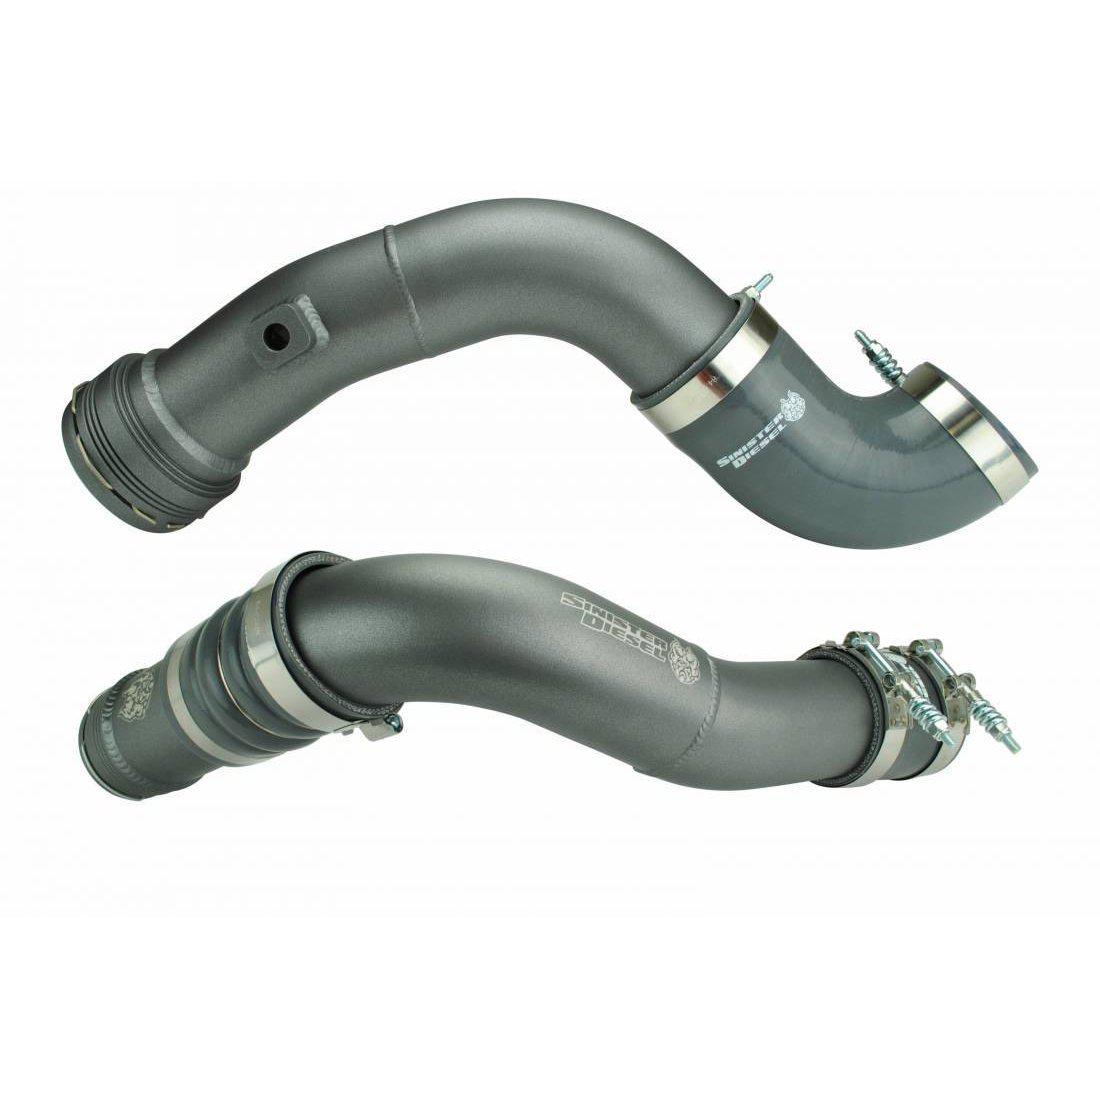 2011-2016 Powerstroke Charge Pipe Kit (SD-6.7PIPK11-01-20)-Intercooler Piping-Sinister-Dirty Diesel Customs